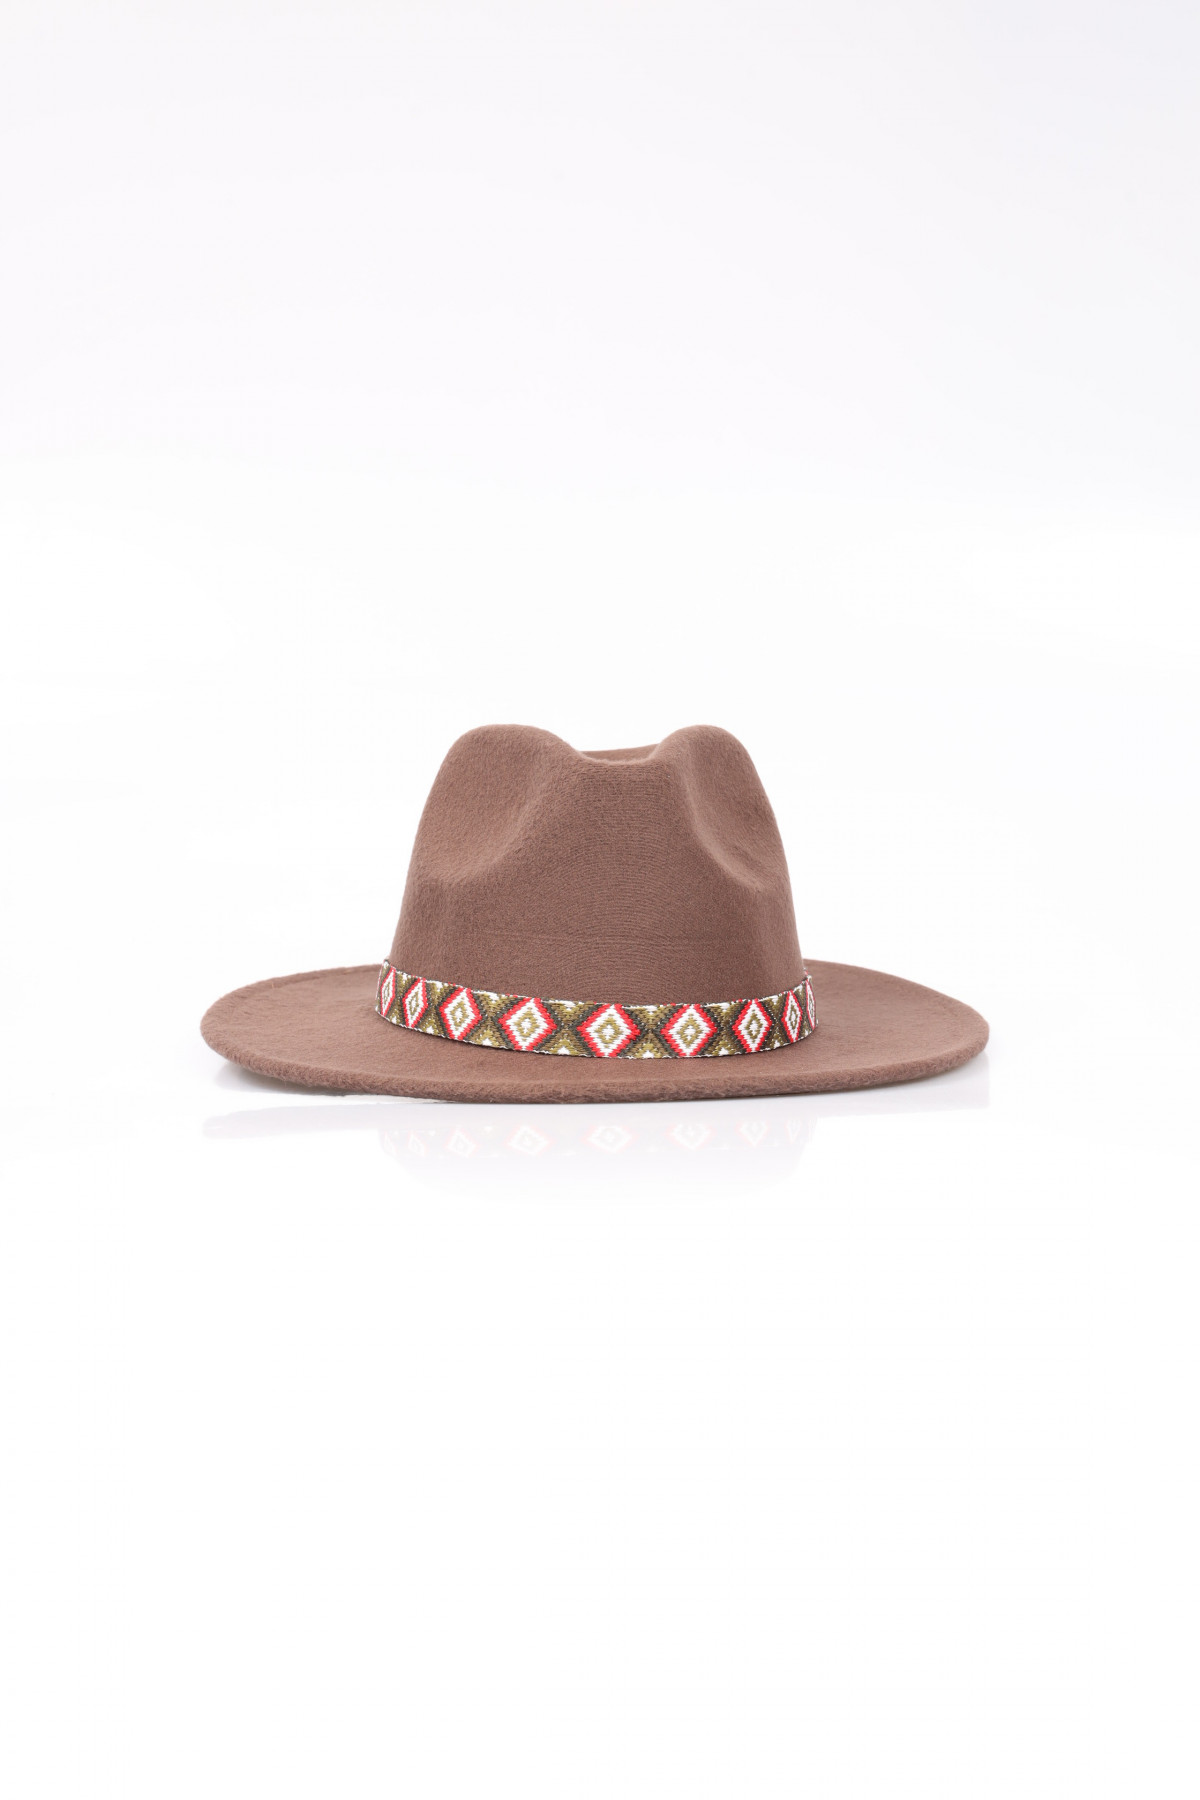 Panama Hat with Ethnic Patterned Ribbon